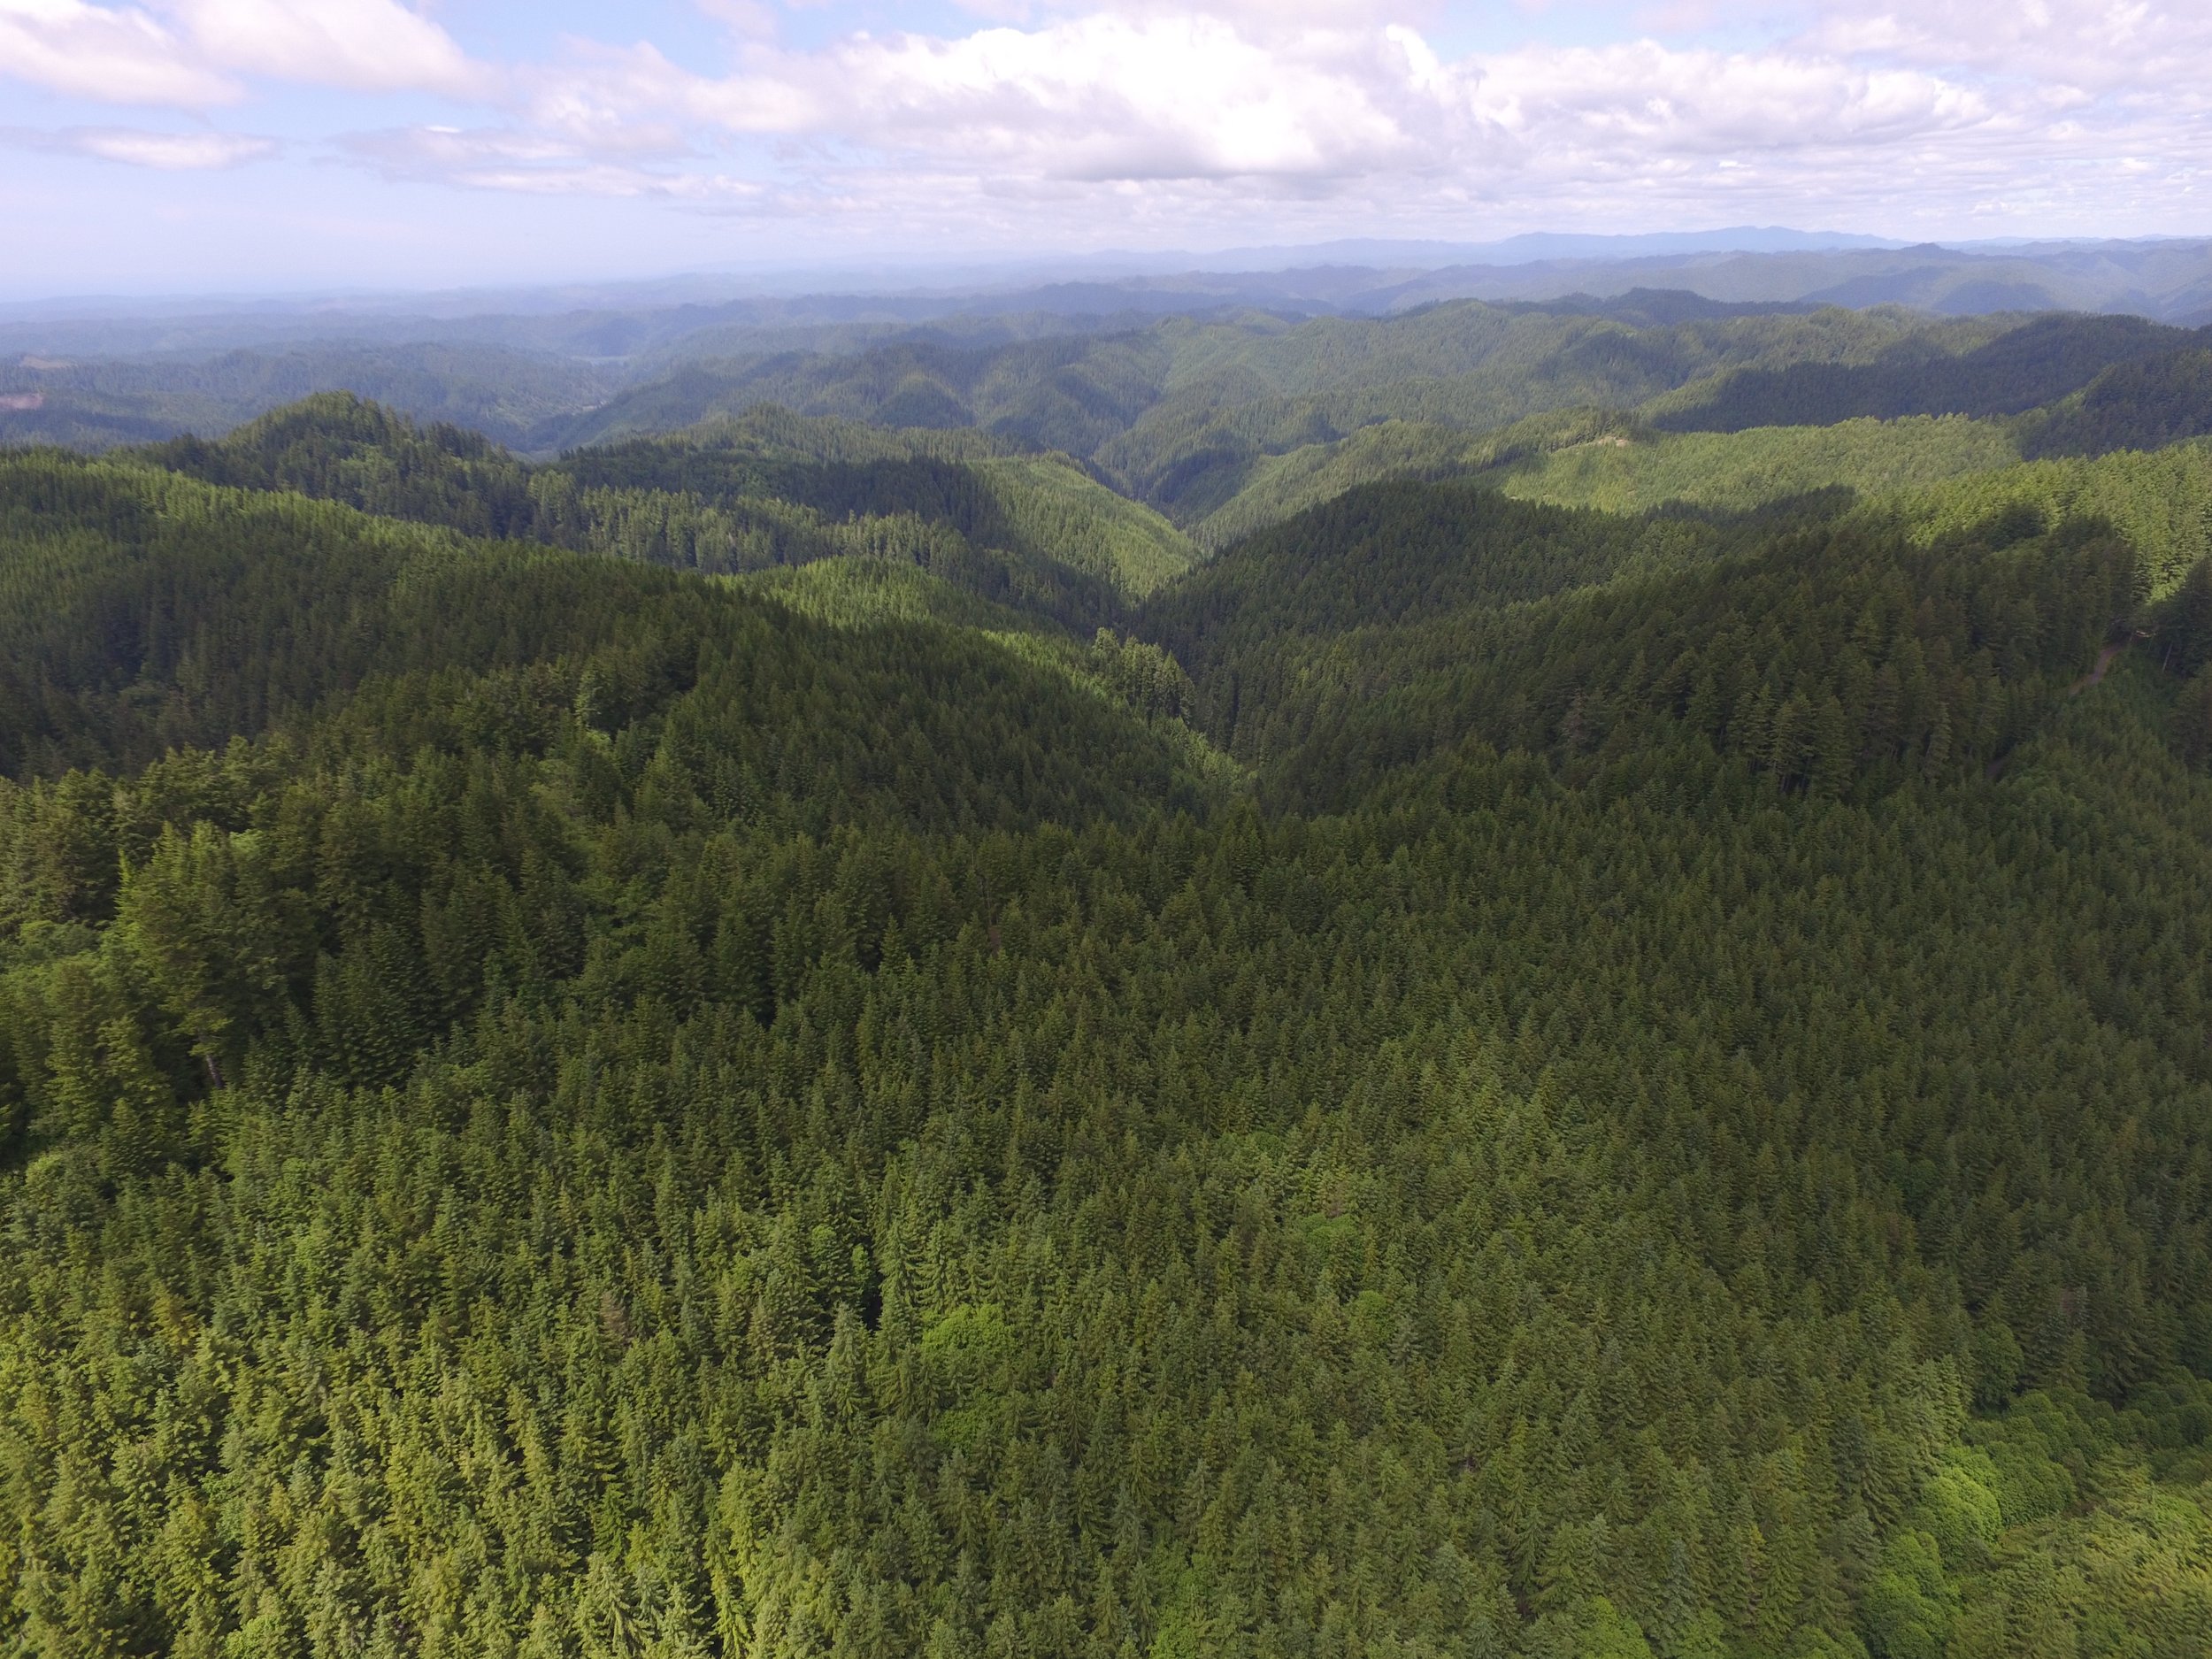 EPA/BLM: Forest policy and climate change in the Coast Range of Oregon, 2013-2016